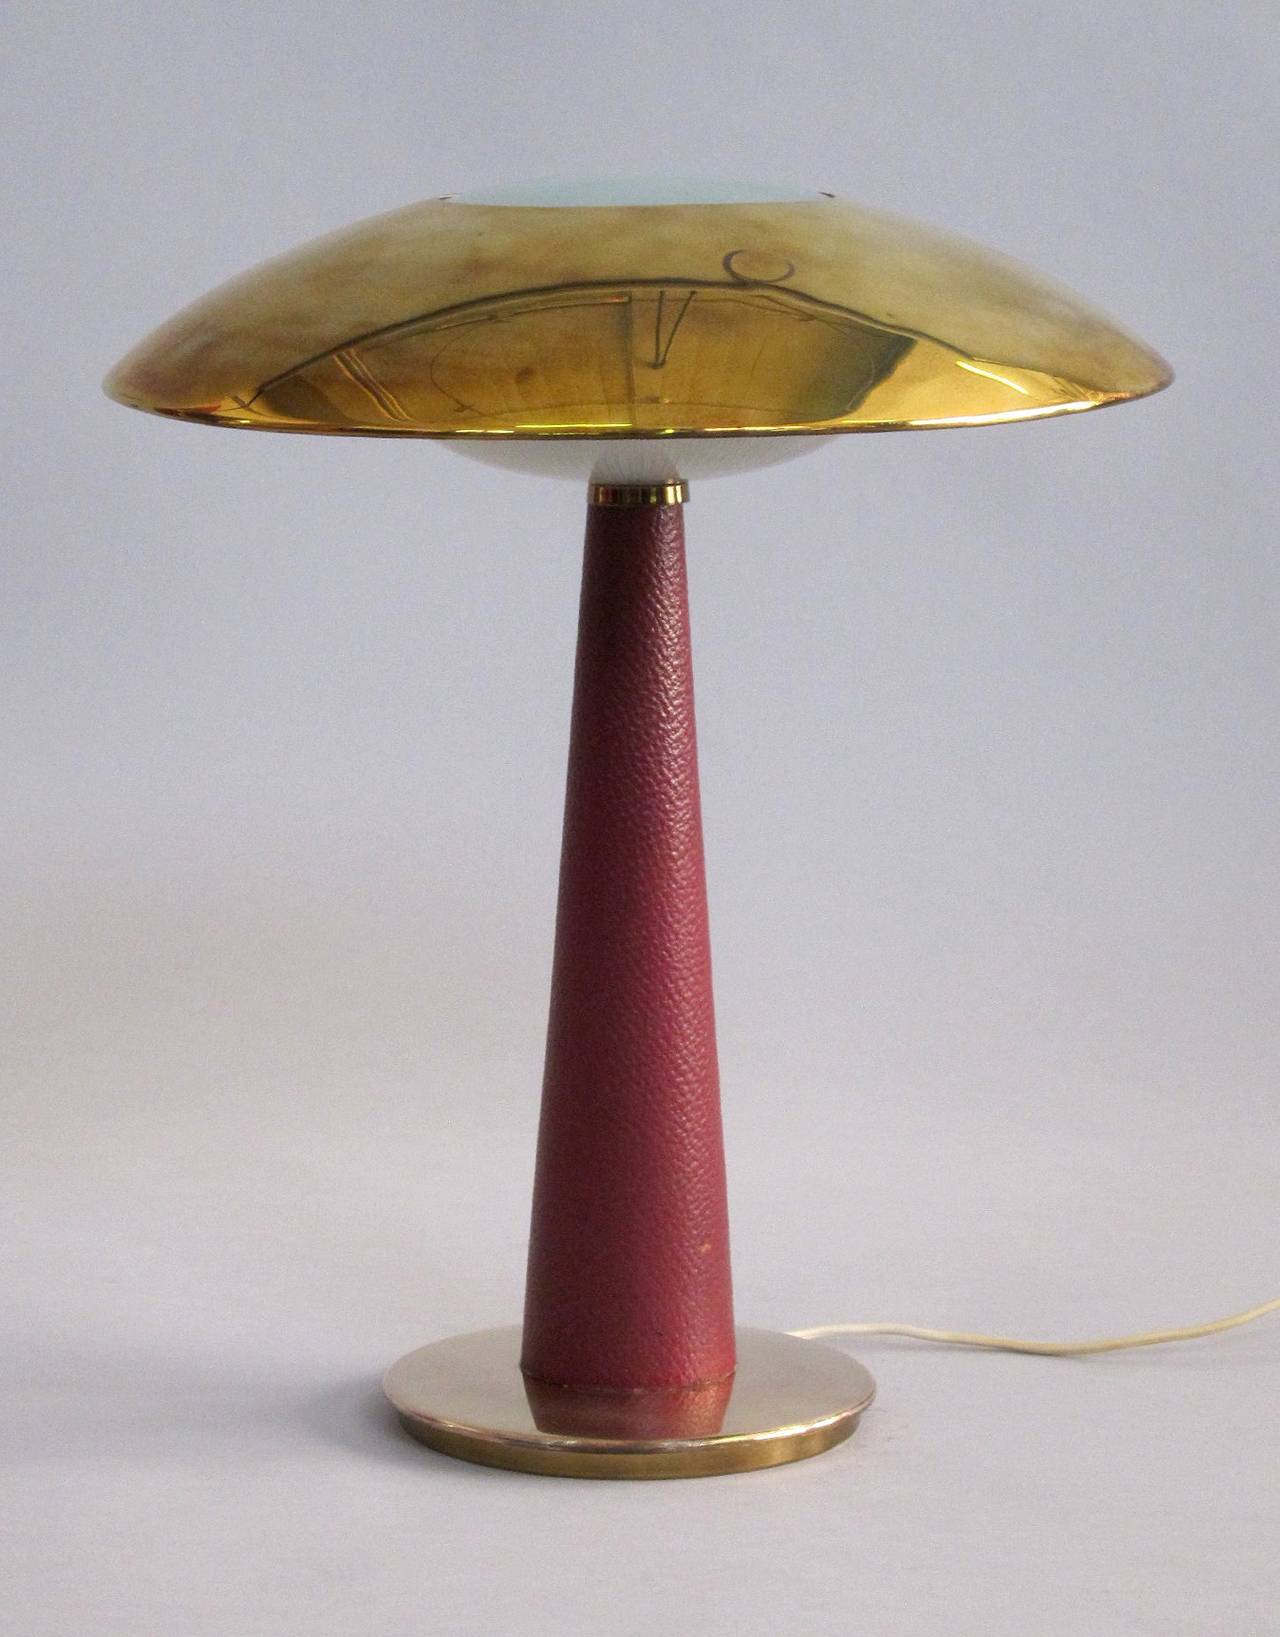 The opening in the brass shade is covered by a convex, sanded glass.
Under the brass shade there is a corrugated cast glass, which covers the two fixtures. The stand is covered with red leather.